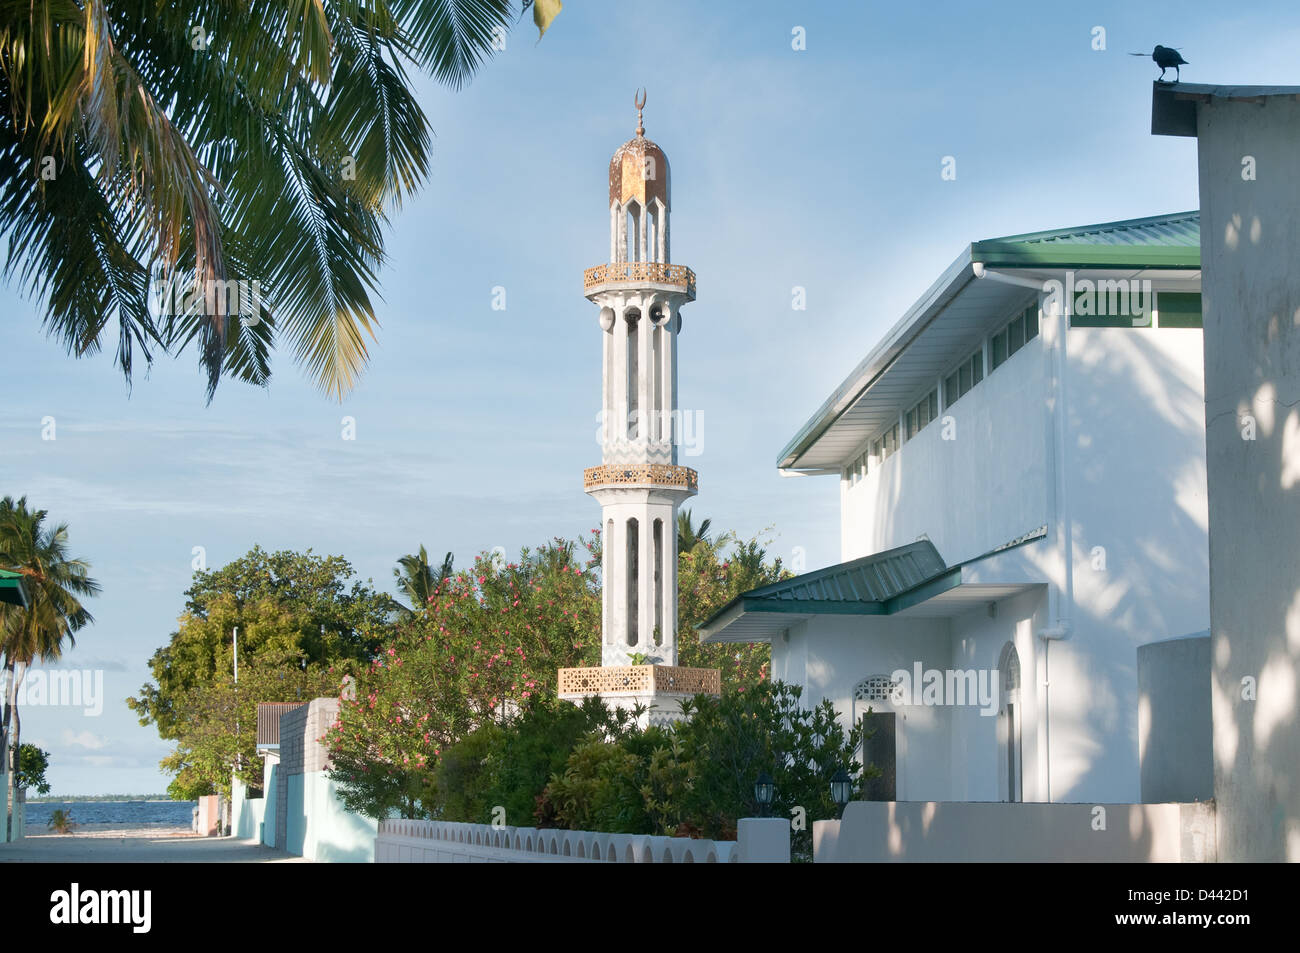 Mosque on the island of Meedhoo in the Maldives Stock Photo